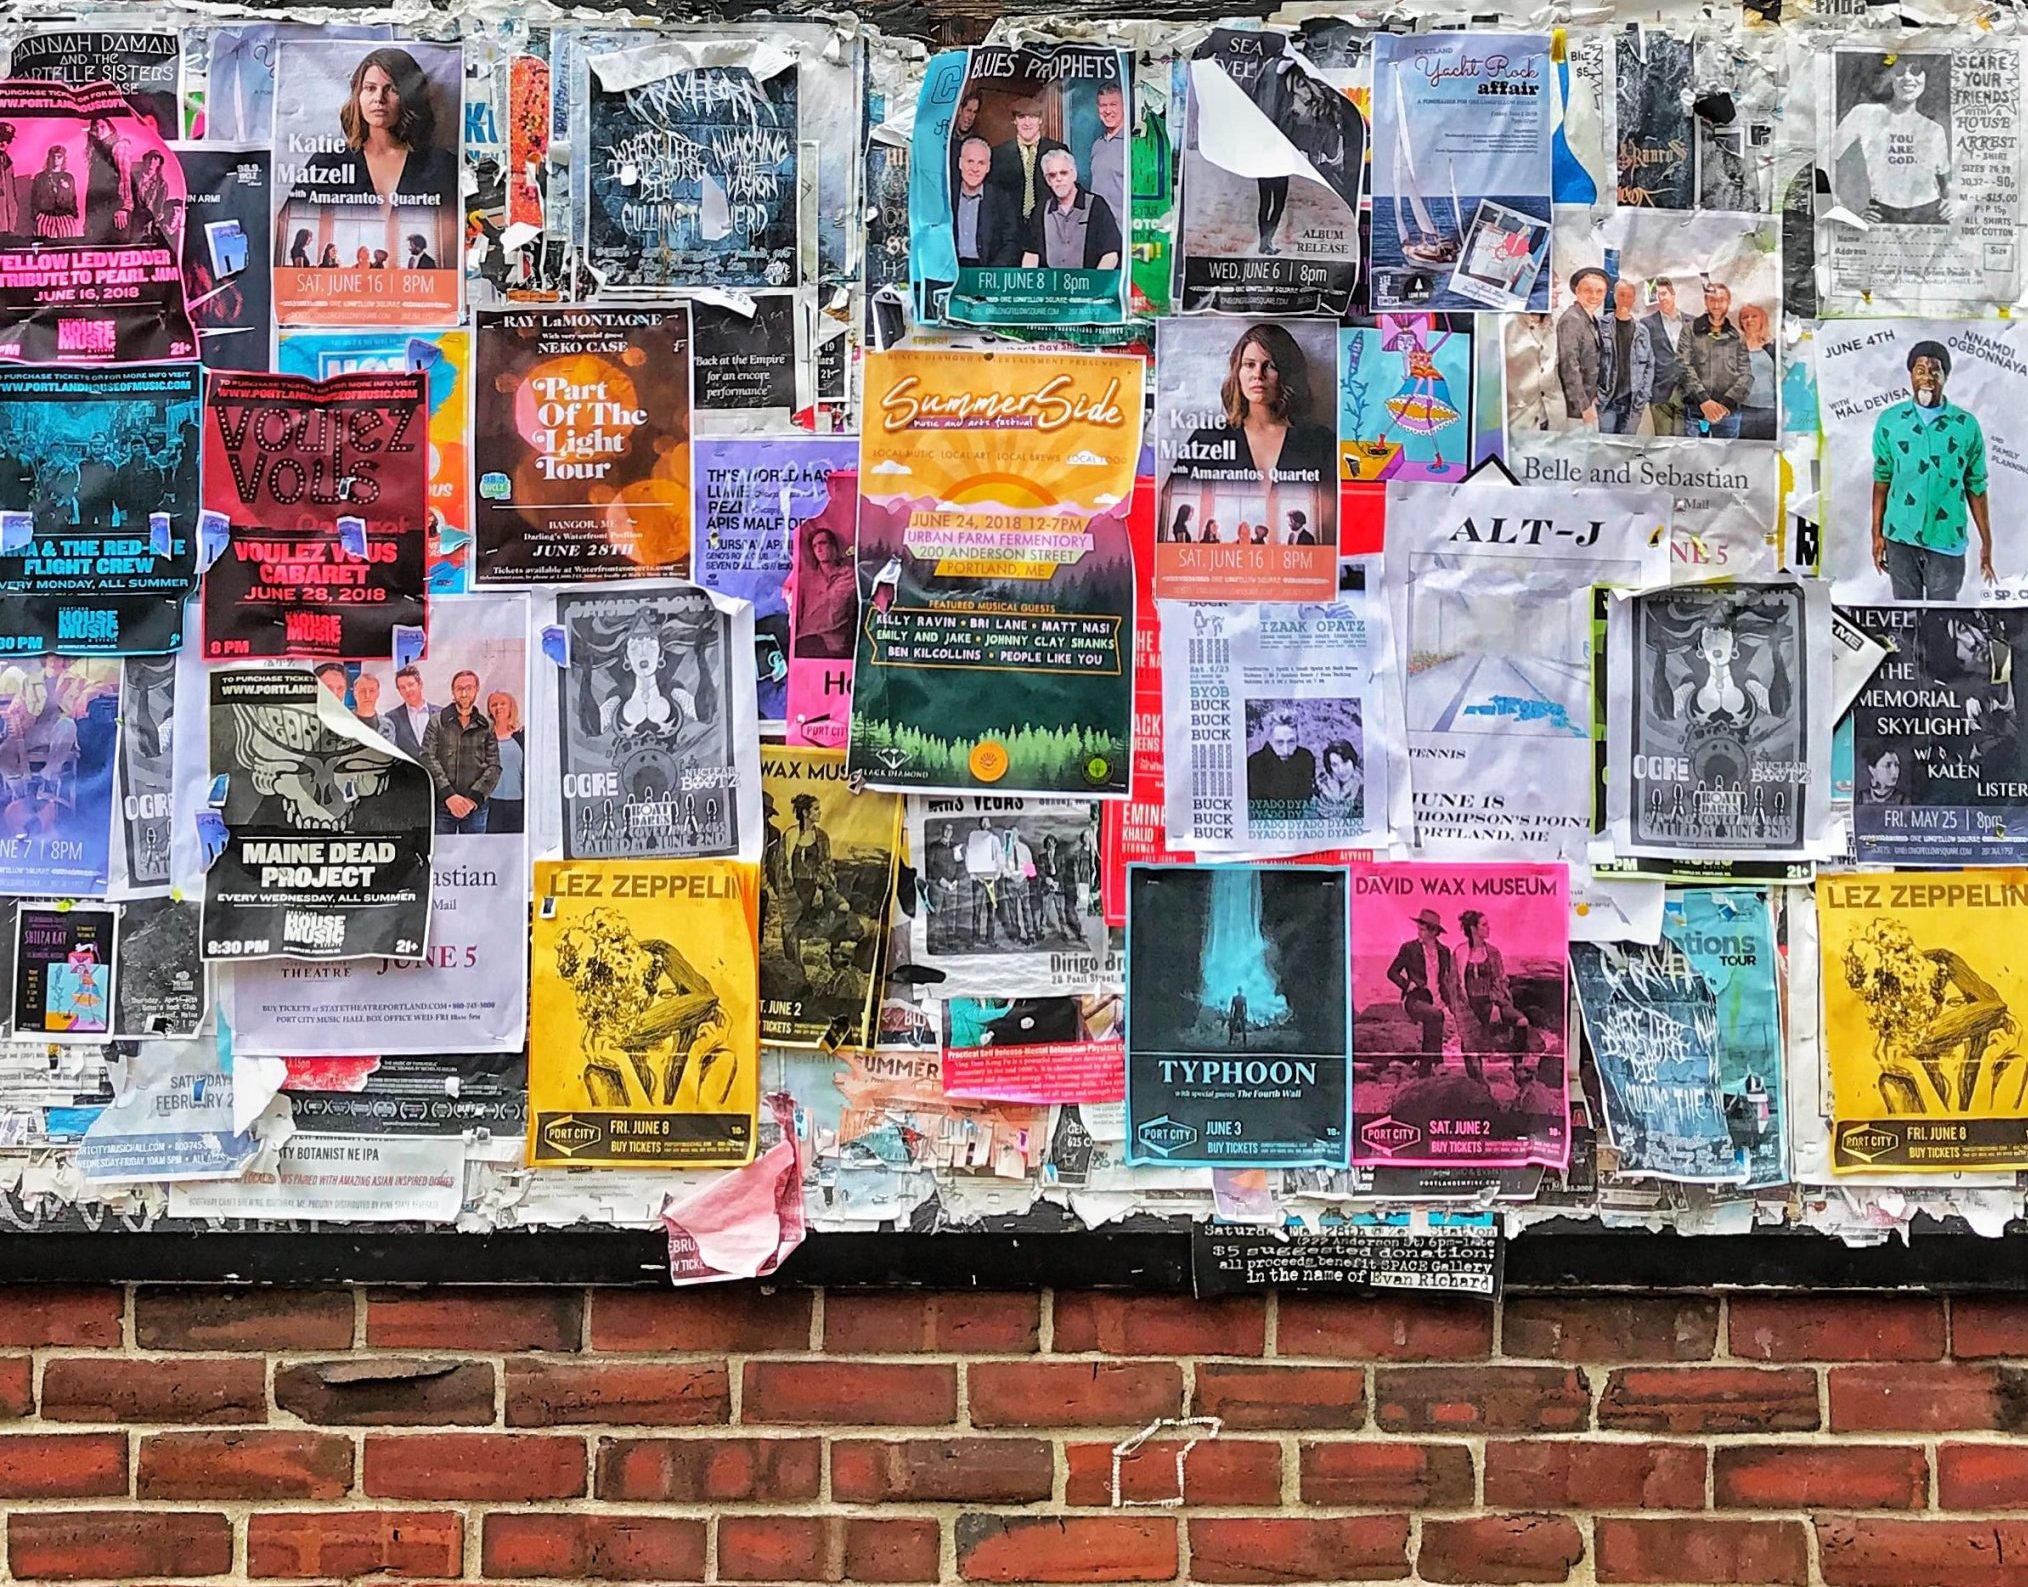 Image of several posters on a brick wall